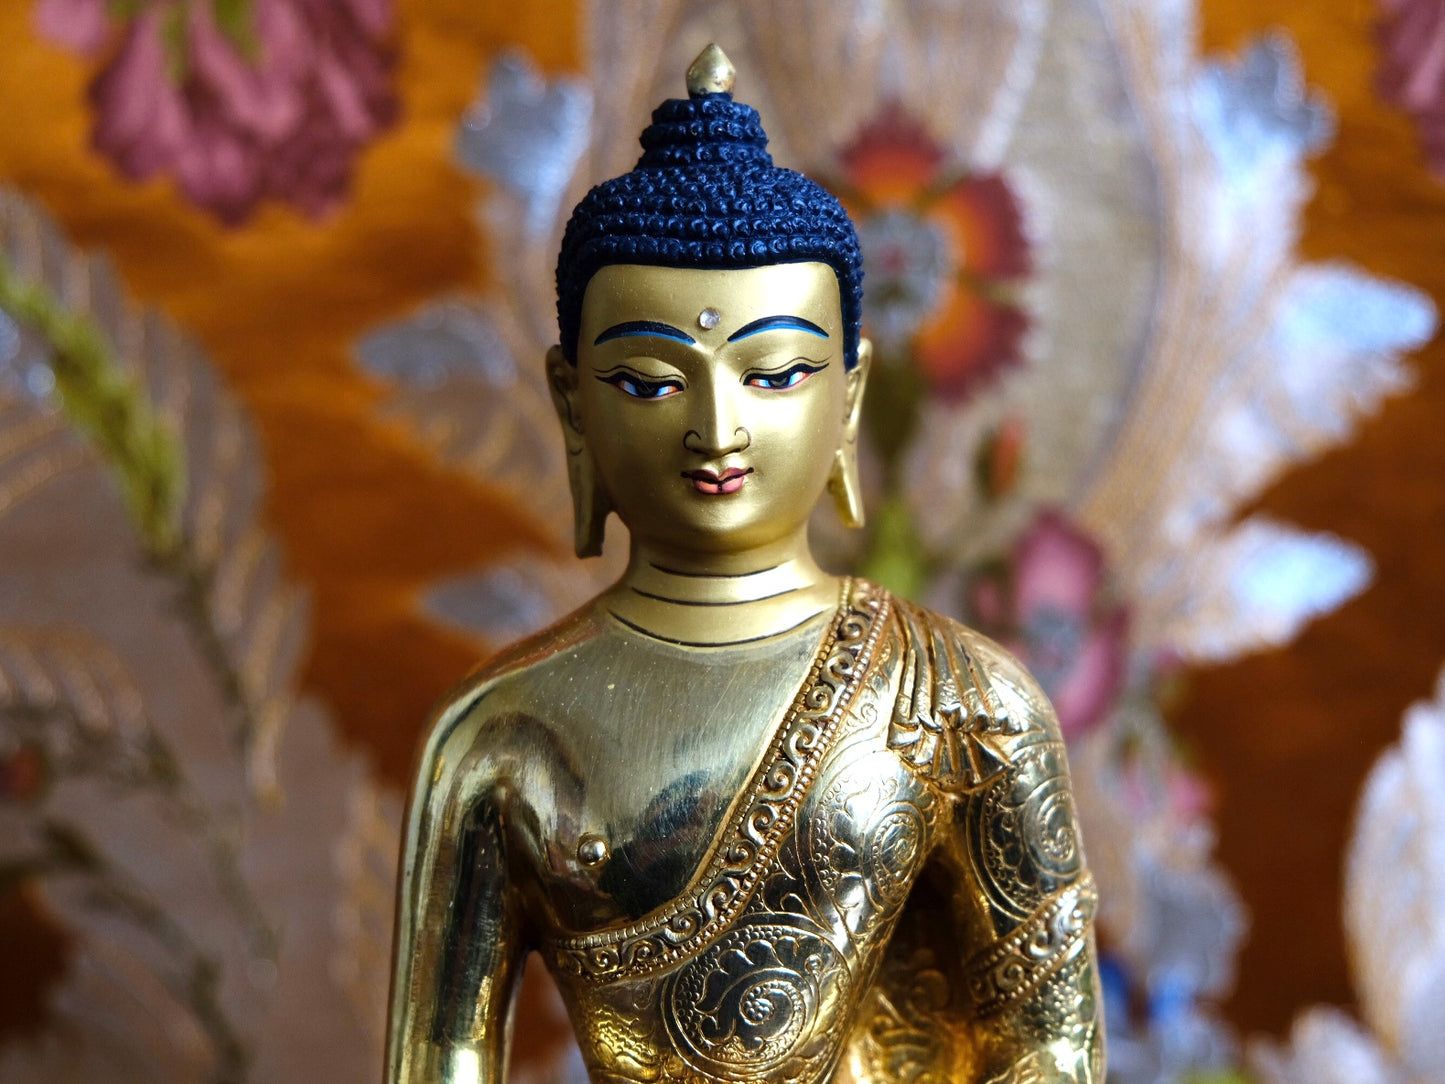 Close up showing calm and peaceful face of Buddha statue